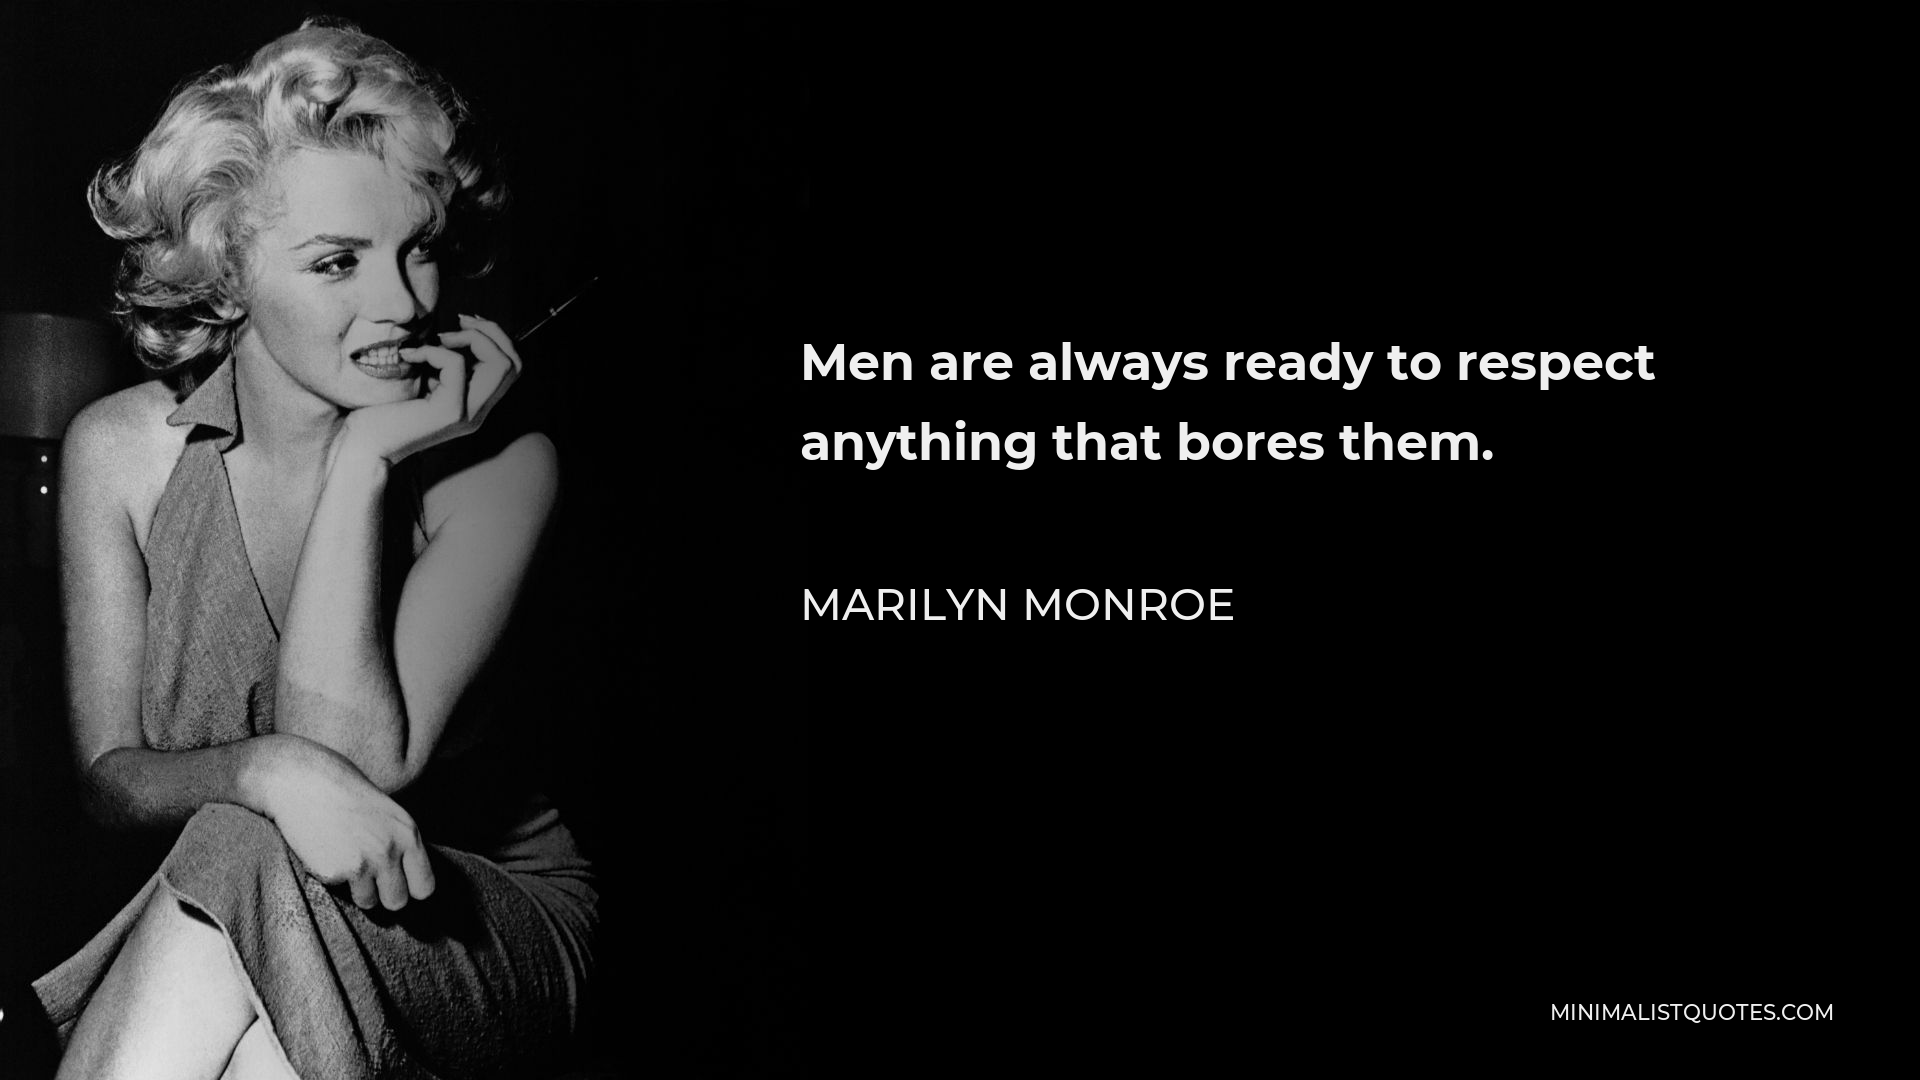 Marilyn Monroe Quote - Men are always ready to respect anything that bores them.